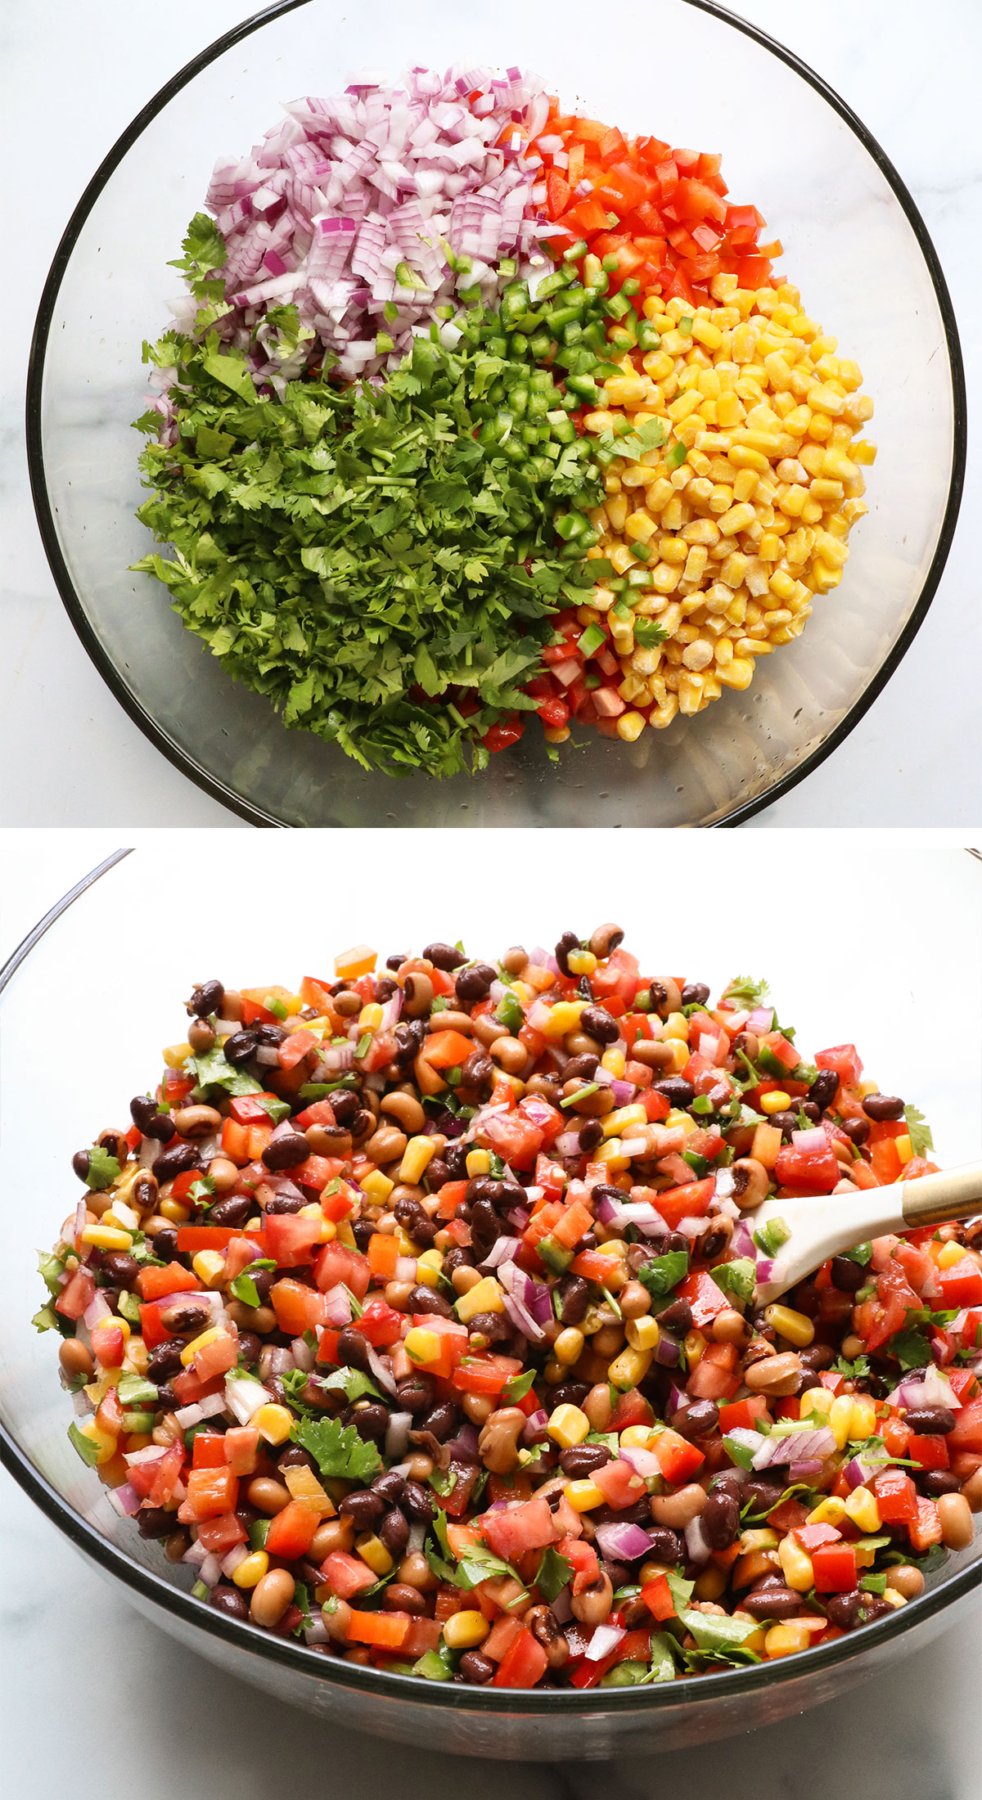 chopped veggies added to cowboy caviar and stirred together in large bowl.